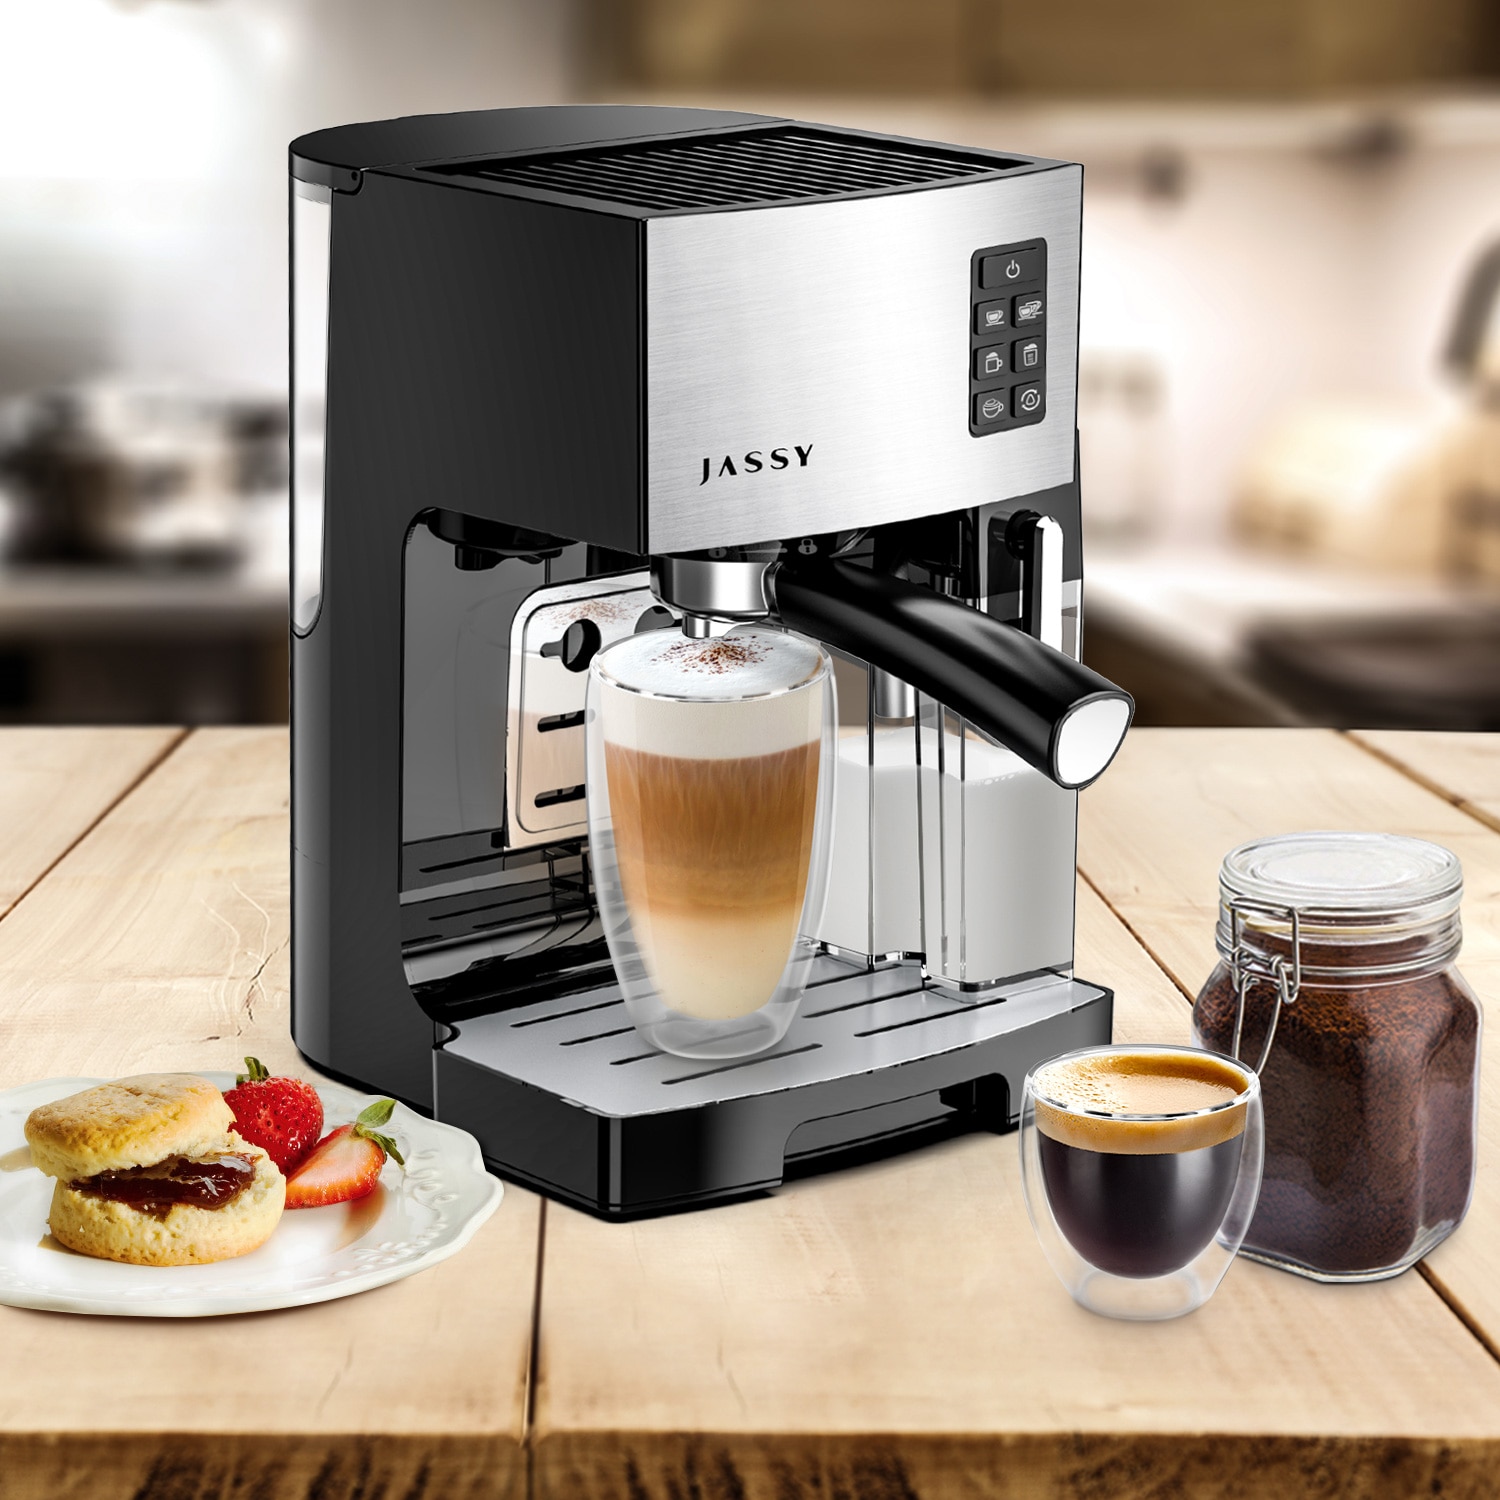 JASSY Coffee Maker One Touch Espresso Machine 19 Bar High Pressure Automatic Coffee Machine With Automatic Milk Frothing System|Coffee Makers| - AliExpress